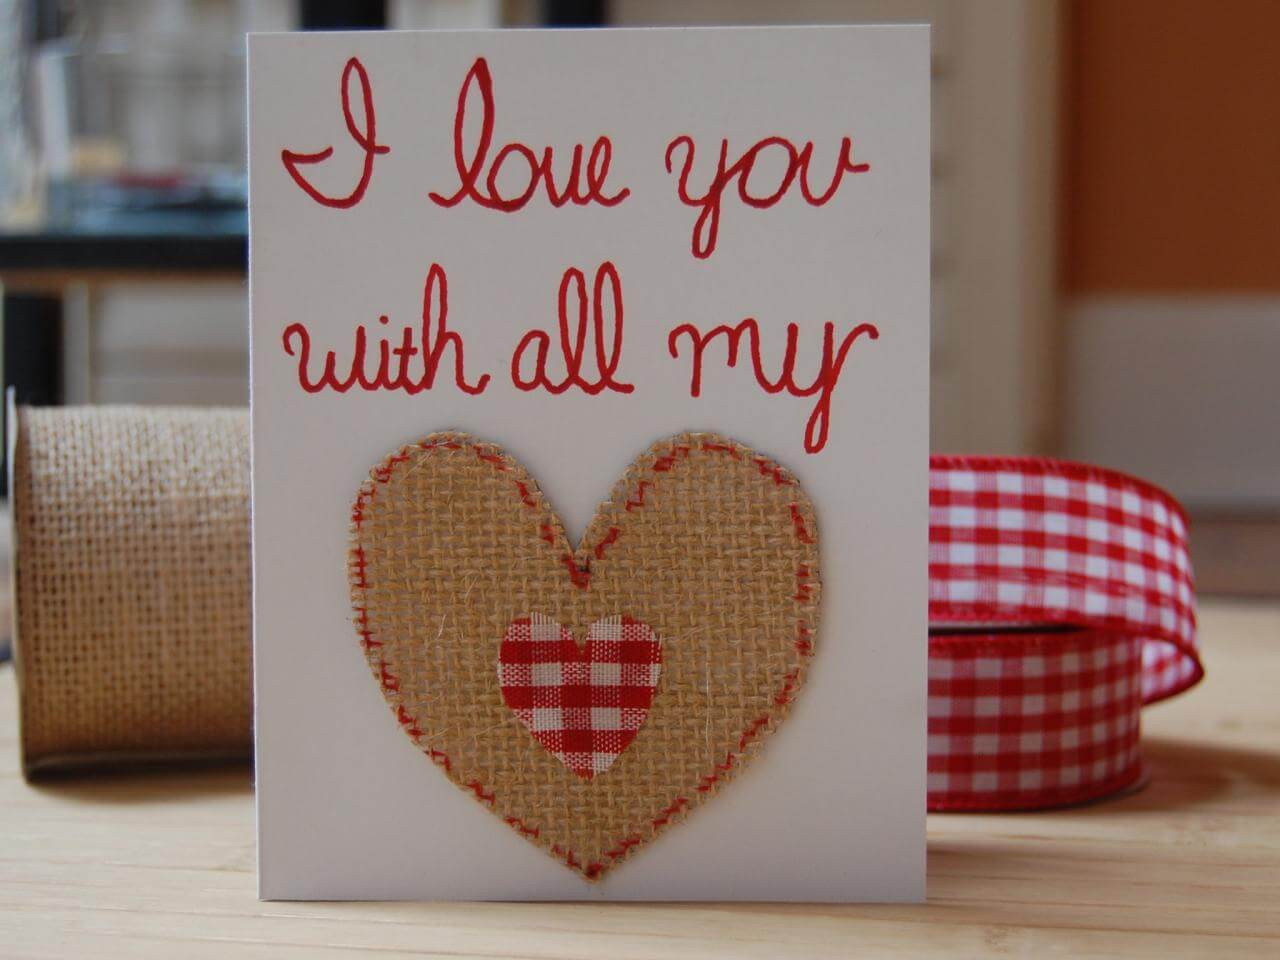 Valentines Gift Ideas For Him Homemade
 45 Homemade Valentines Day Gift Ideas For Him